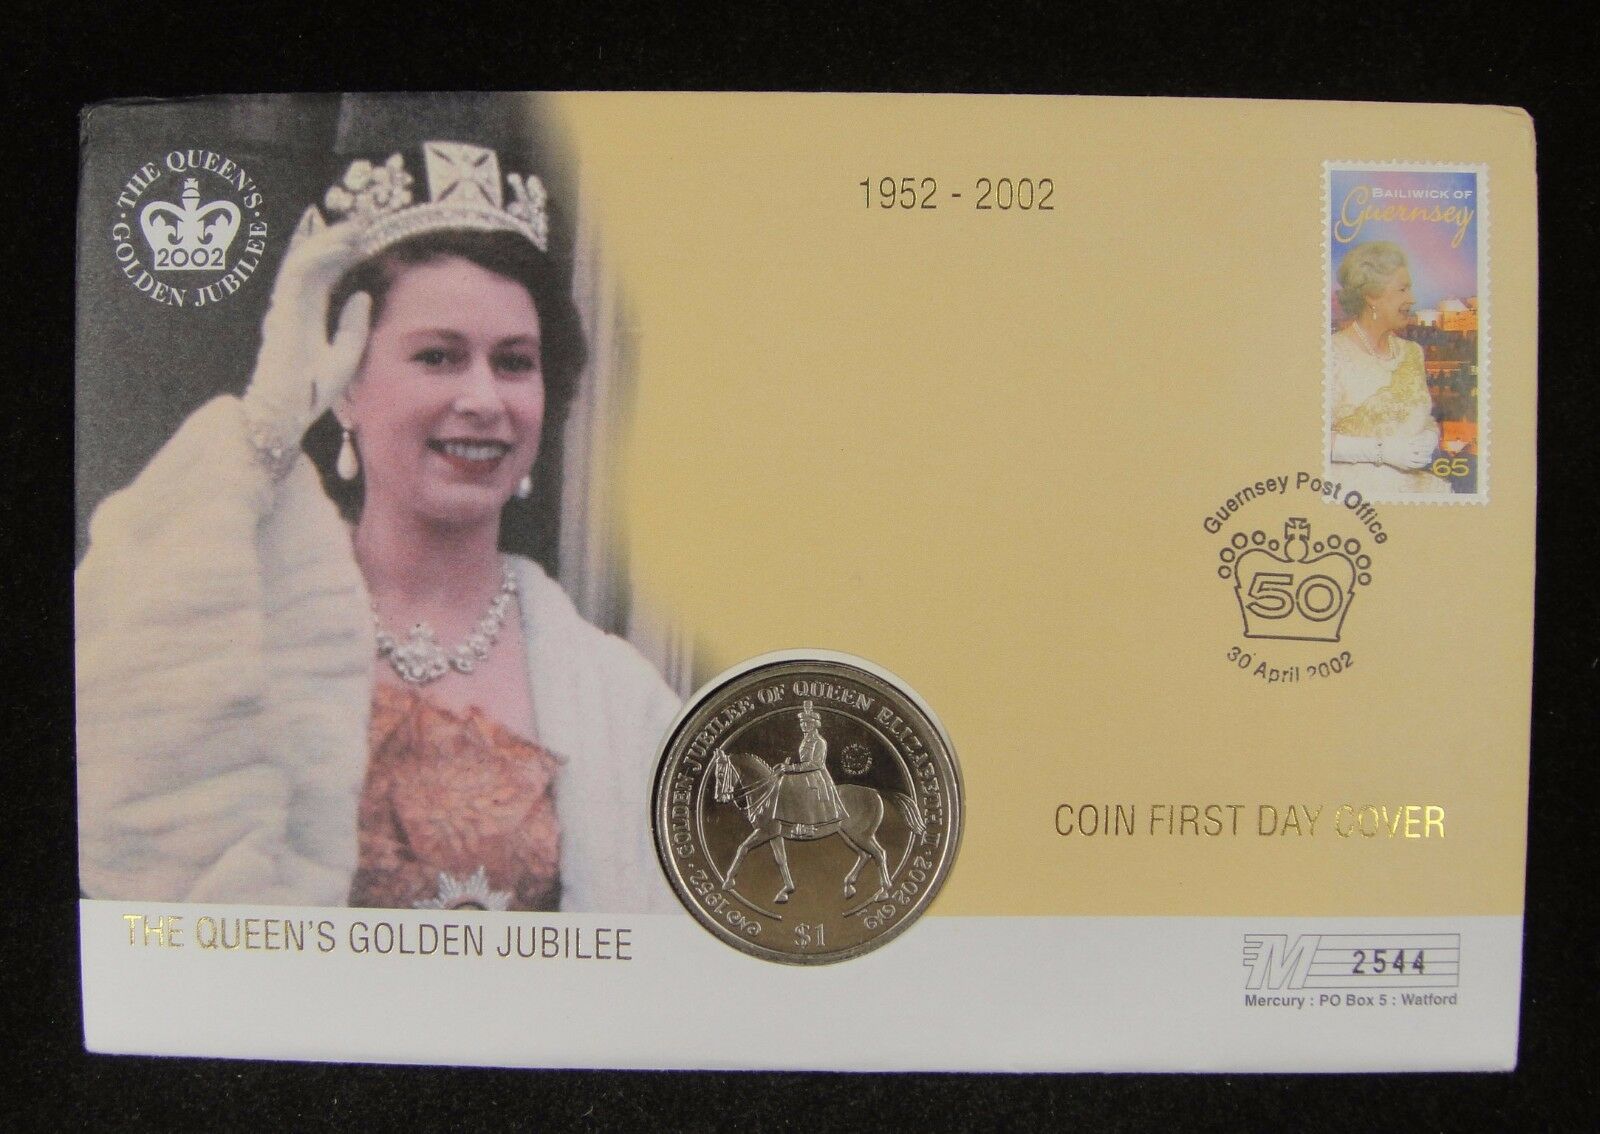 Virgin Islands Coin And Guernsey Stamp First Day Cover, Queen's Golden Jubilee